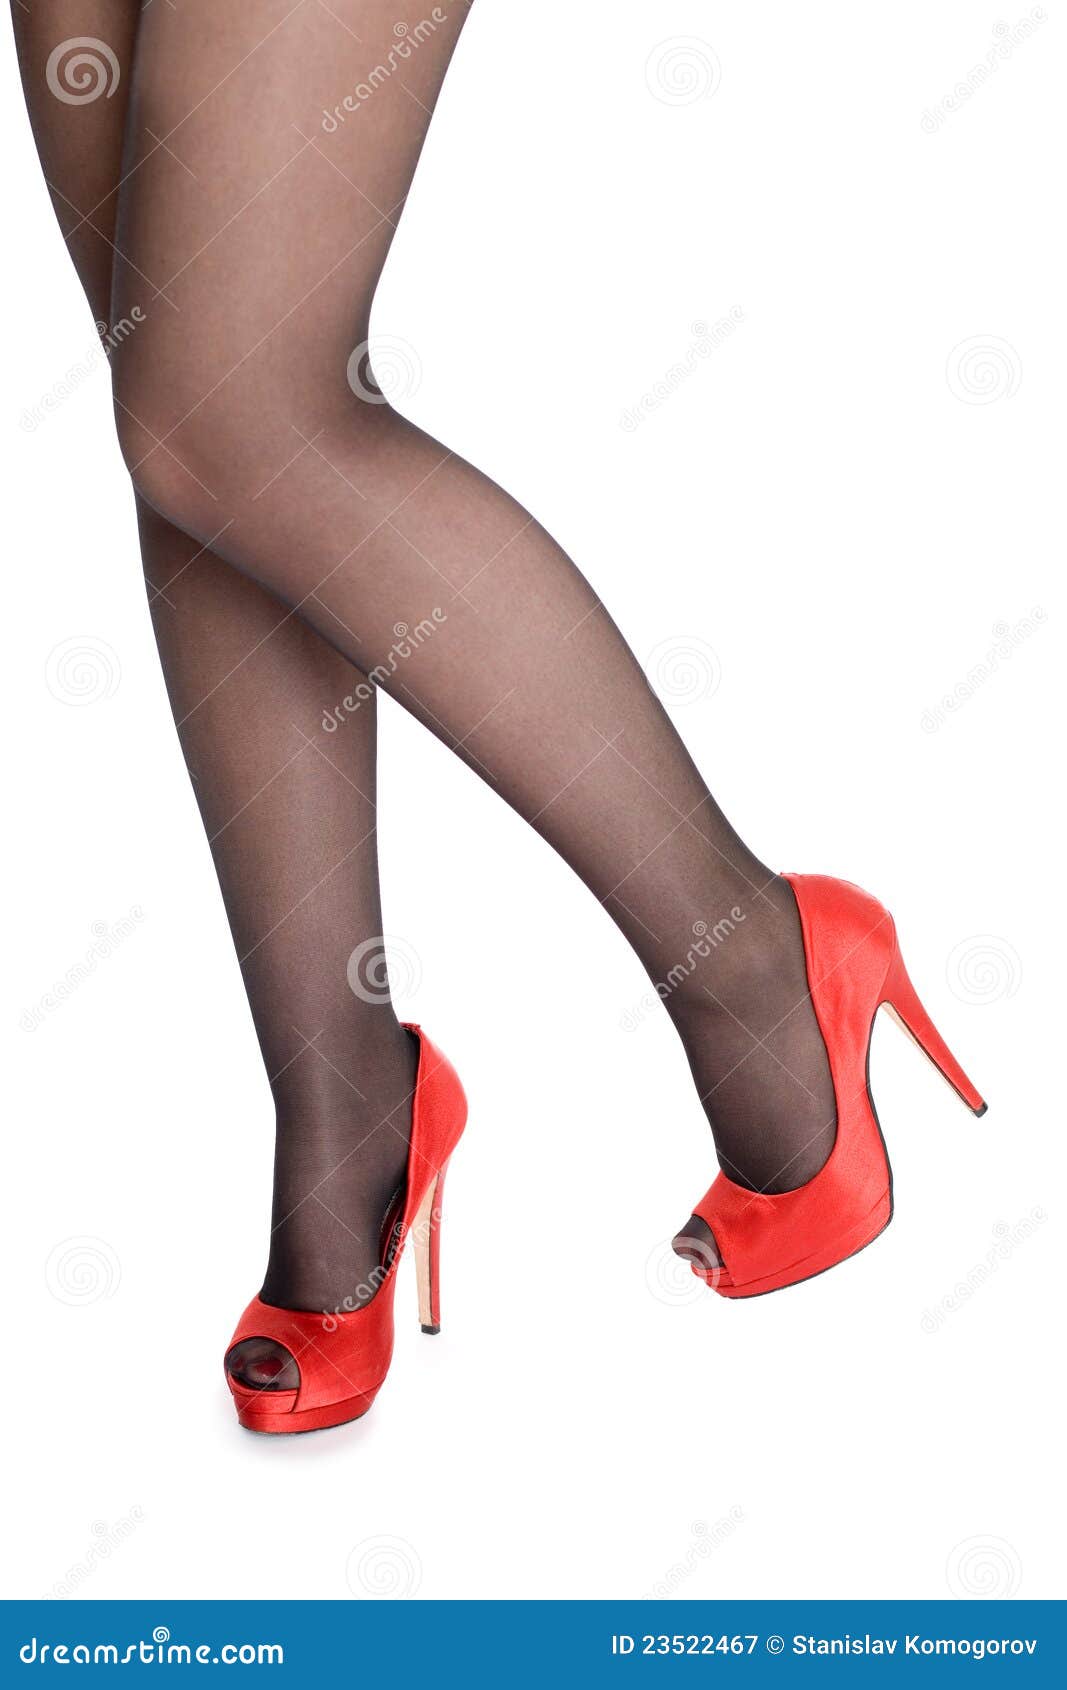 Legs in Pantyhose and Shoes. Stock Image - Image of fashionable